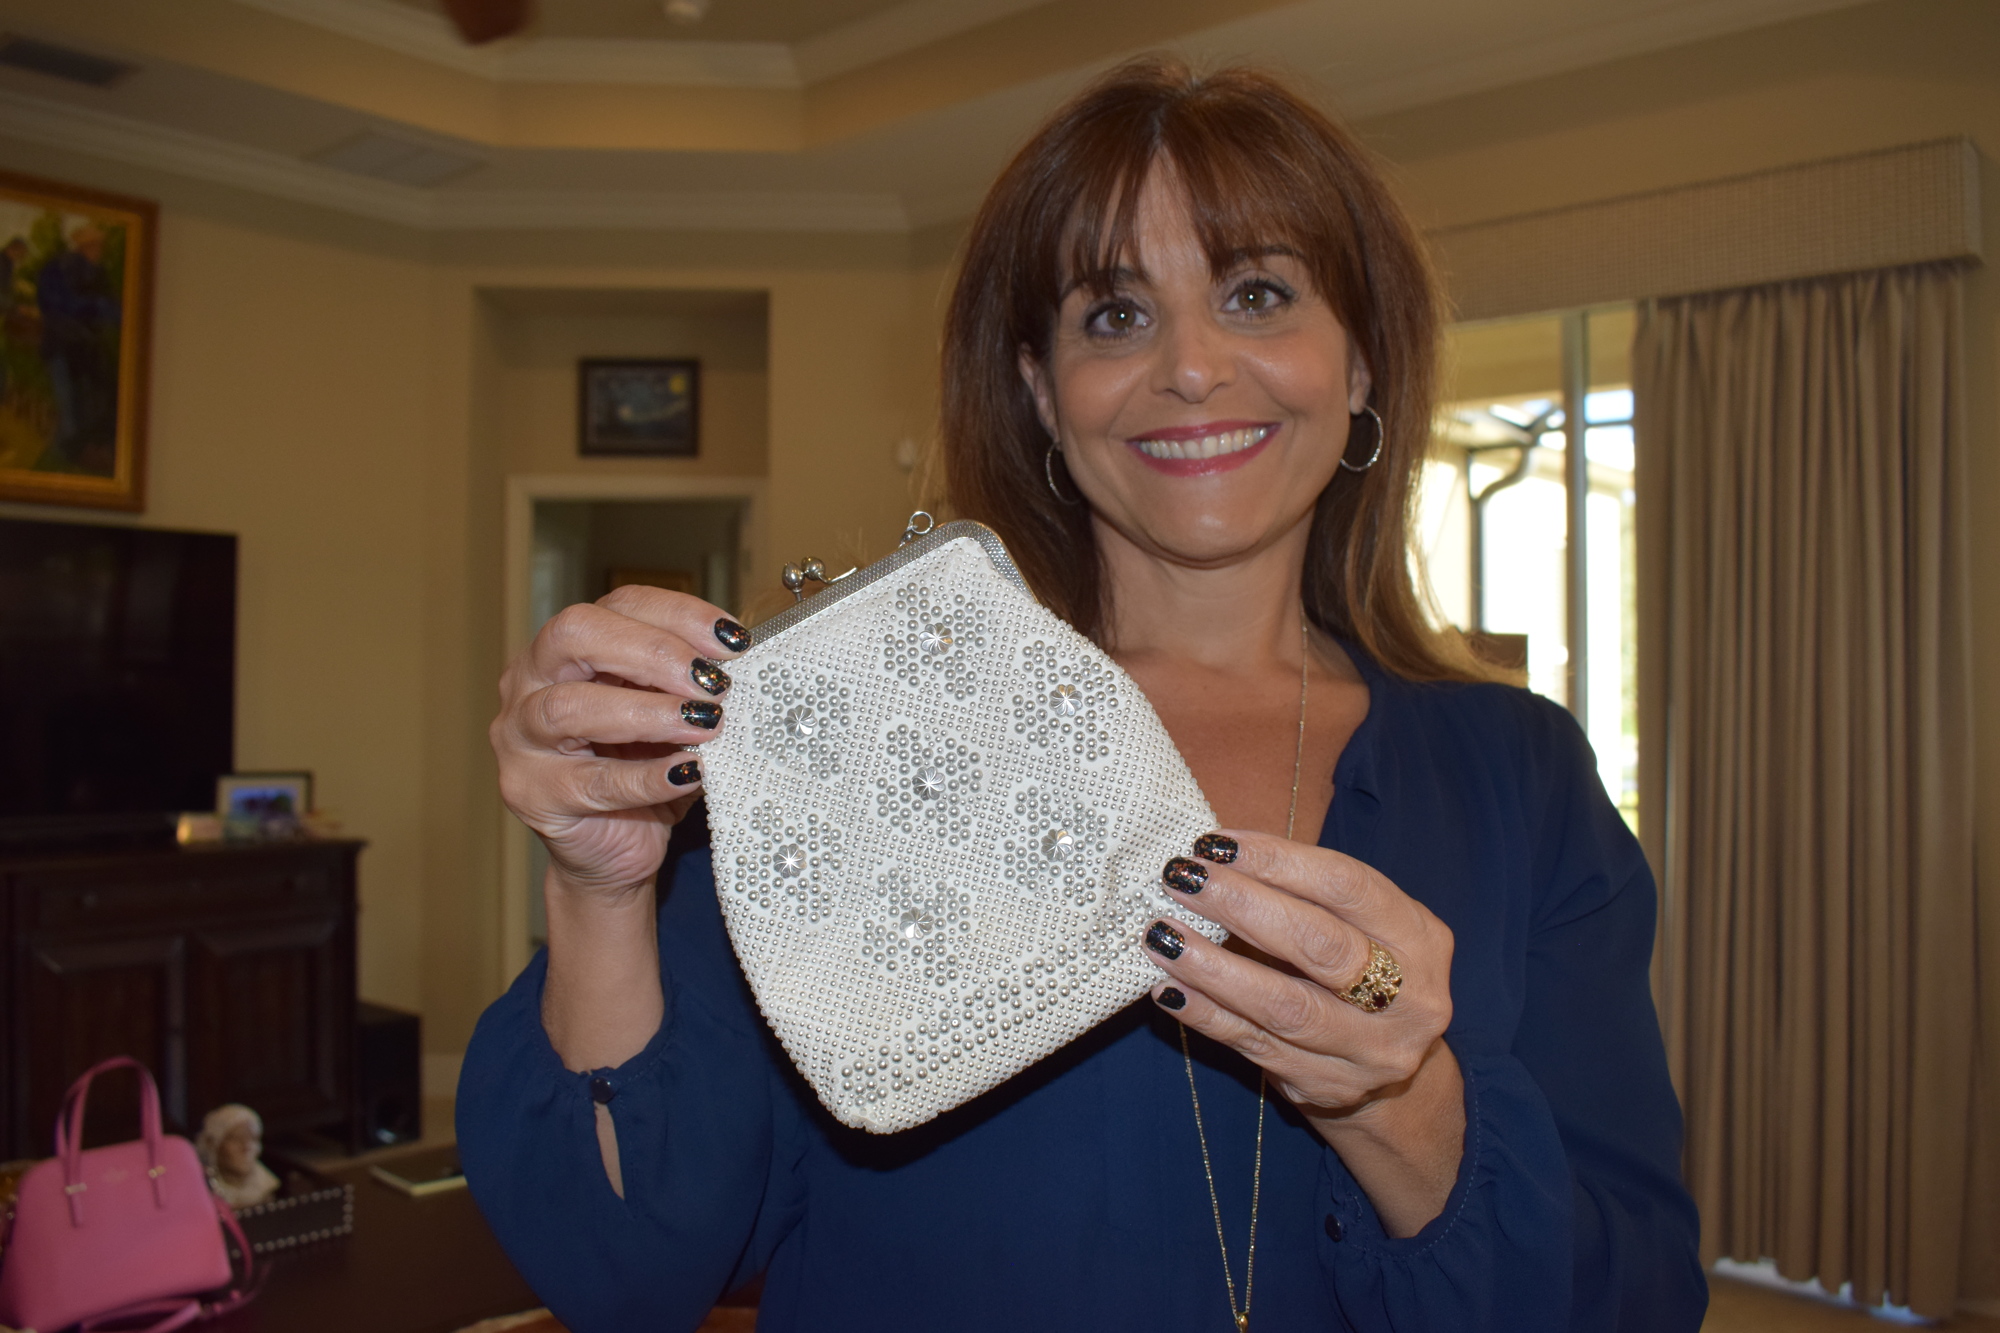 Graceann Frederico still has the bag her mother, Barbara Valente, carried at her wedding to Graceann's dad, Frank.